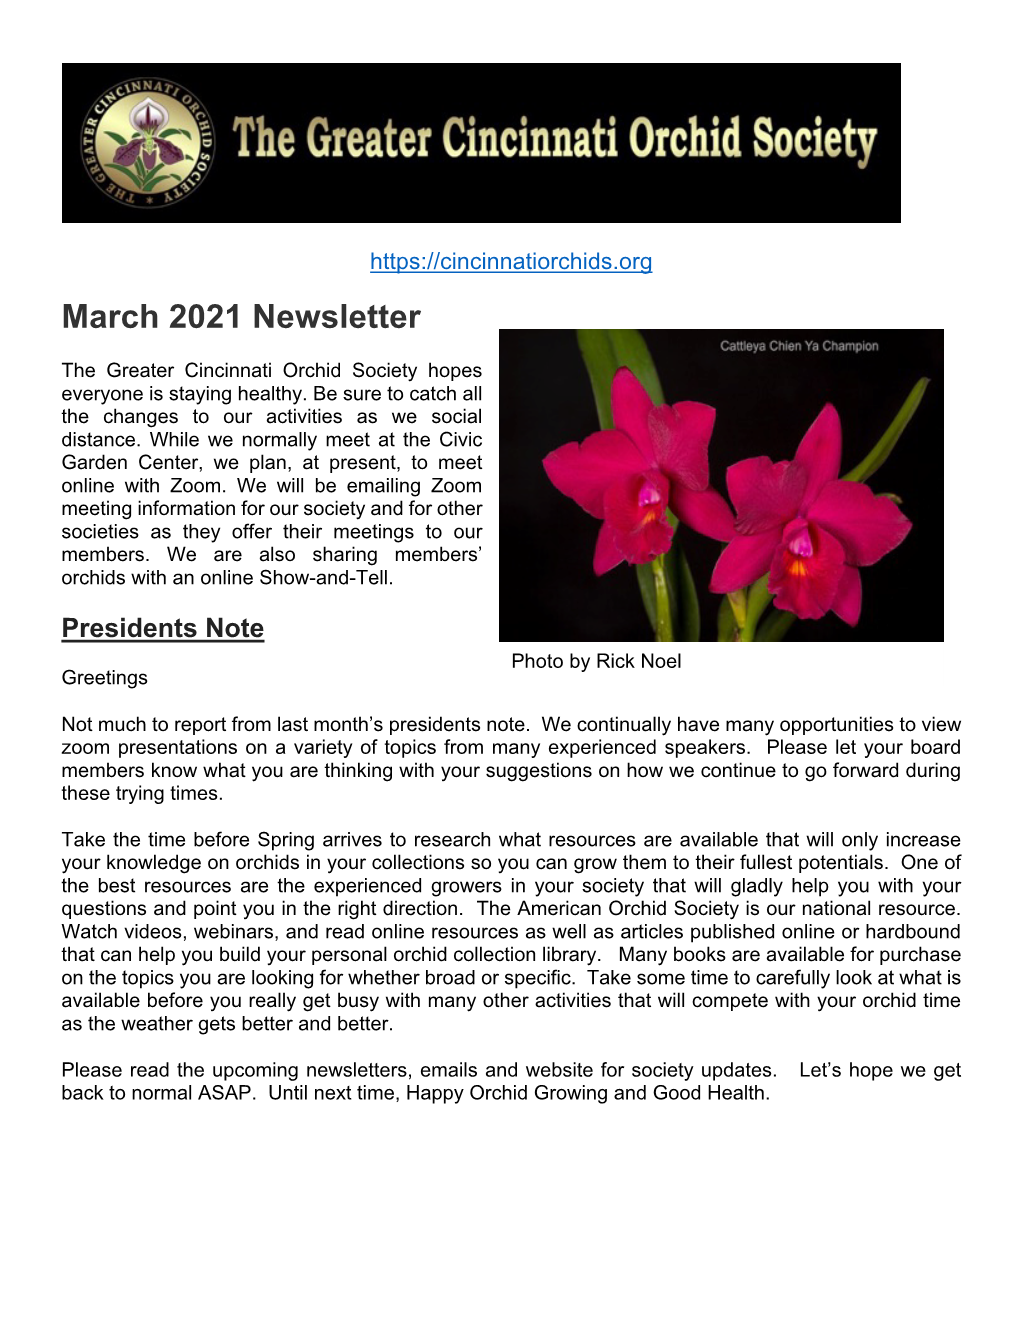 GCOS March 21 Newsletter Email